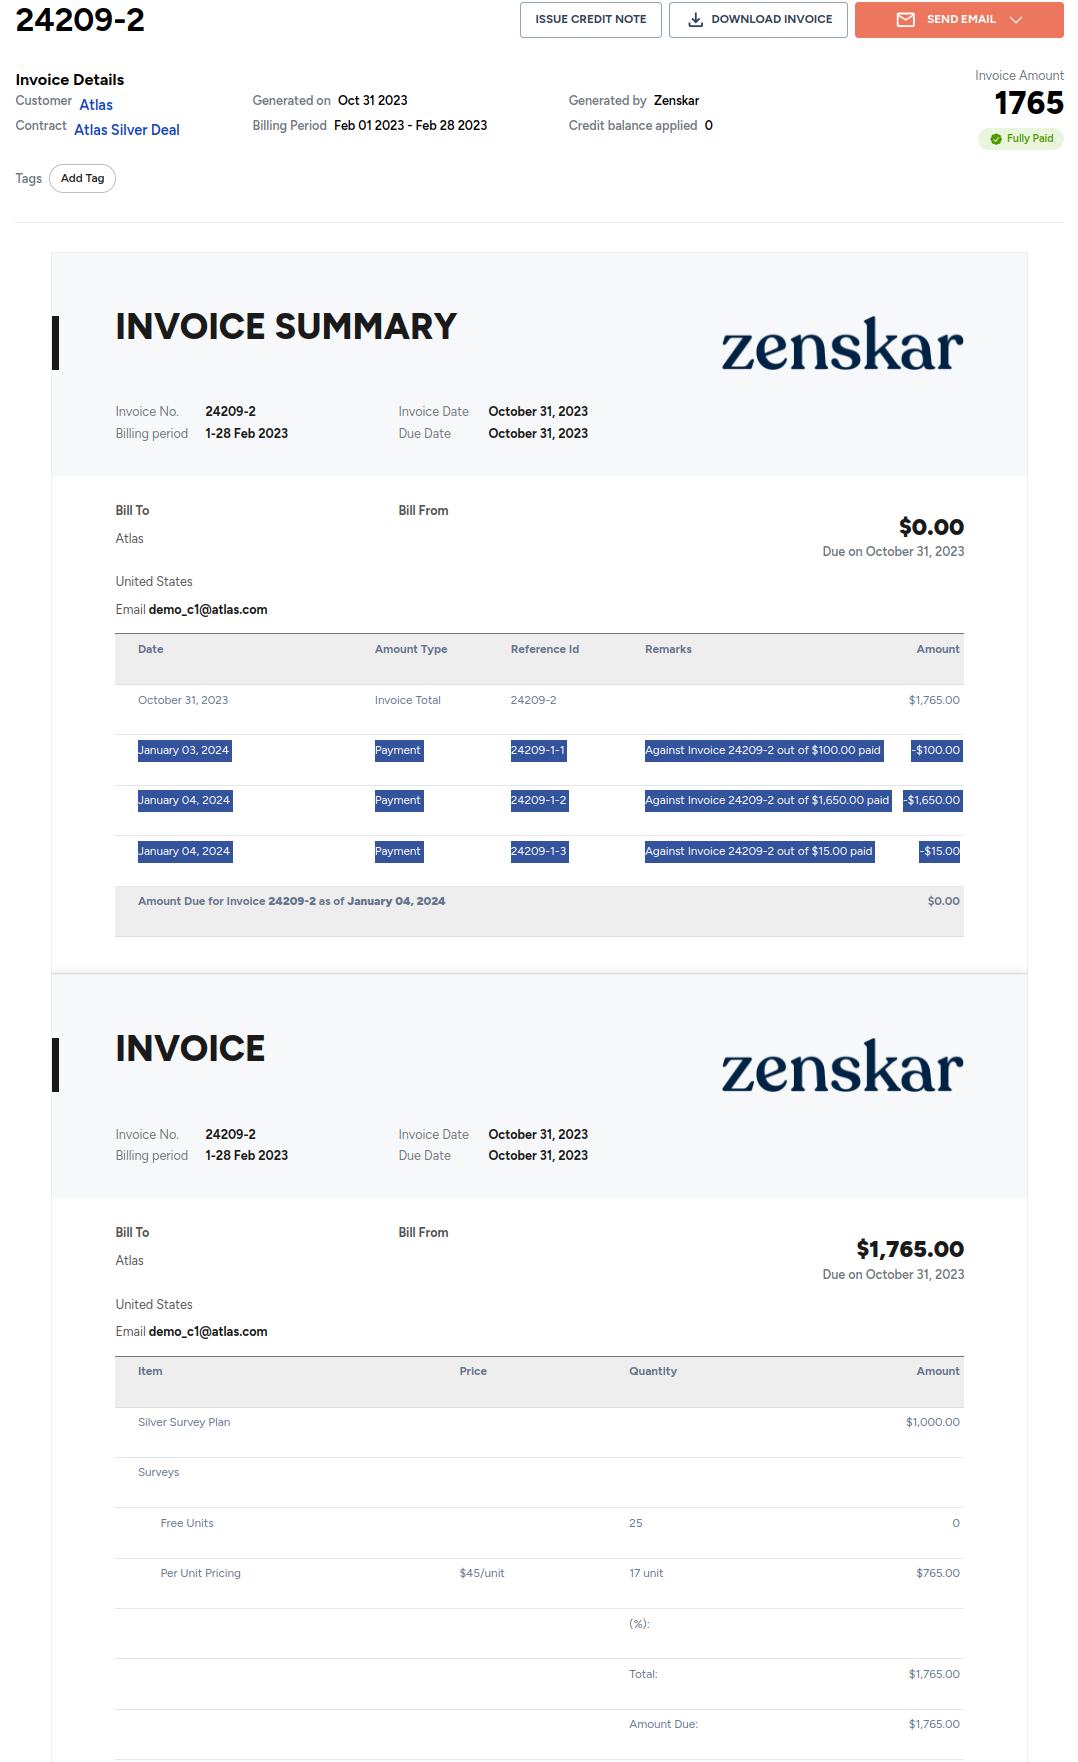 Fig. 4: Multiple partial payments amounting to the total invoice amount made against an approved invoice